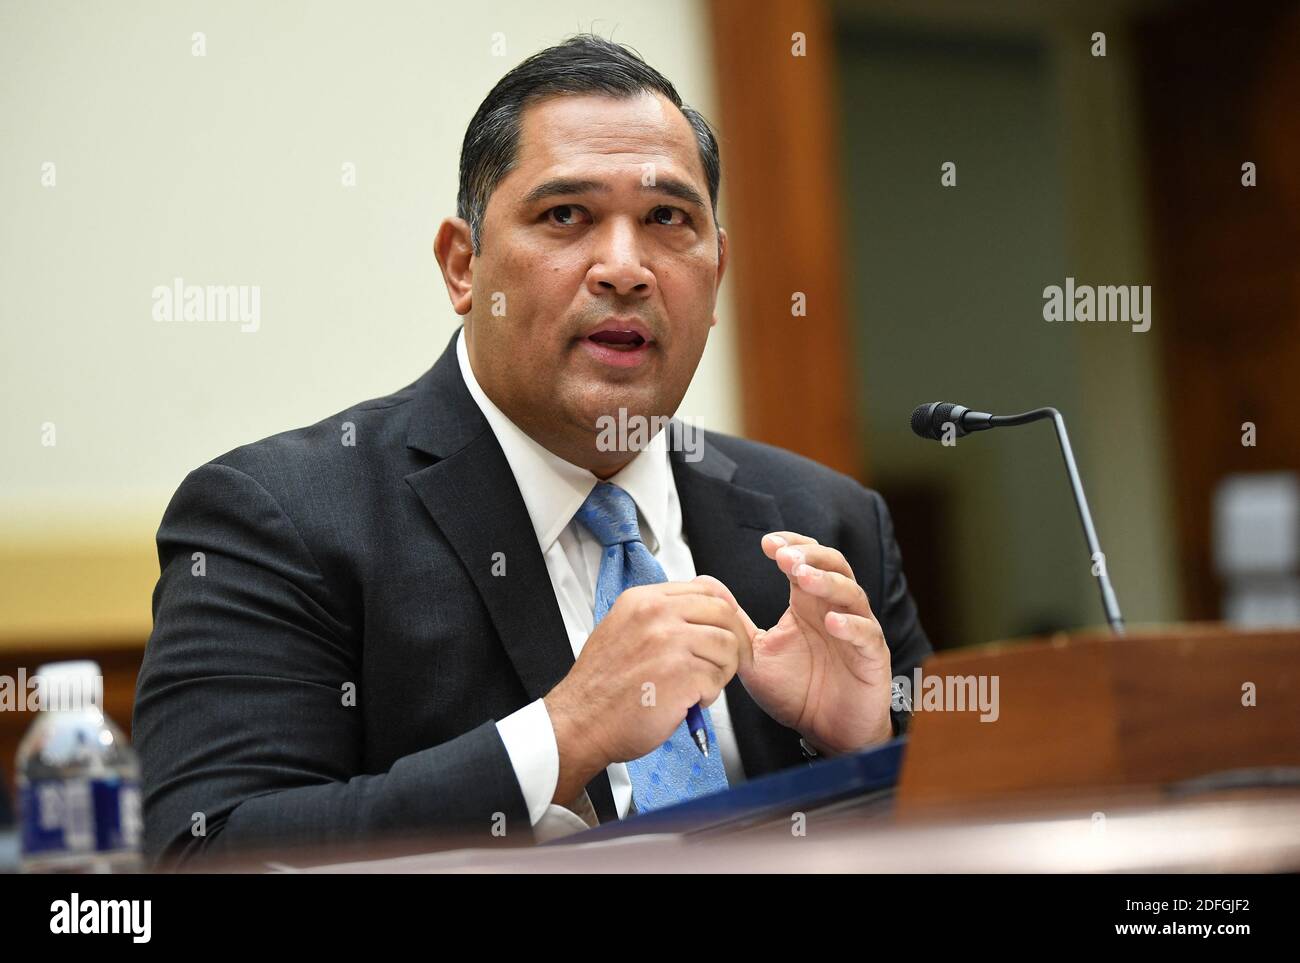 Brian Bulatao, Under Secretary of State for Management, testifies before a House Committee on Foreign Affairs hearing looking into the firing of State Department Inspector General Steven Linick, on Capitol Hill in Washington, D.C. on Wednesday, September 16, 2020. The foreign affairs committee issued the subpoenas as part of the panel's probe into accusations that Linick was fired while investigating Secretary of State Mike Pompeo's role in a controversial $8 billion weapons sale to Saudi Arabia. Photo by Kevin Dietsch/Pool/ABACAPRESS.COM Stock Photo